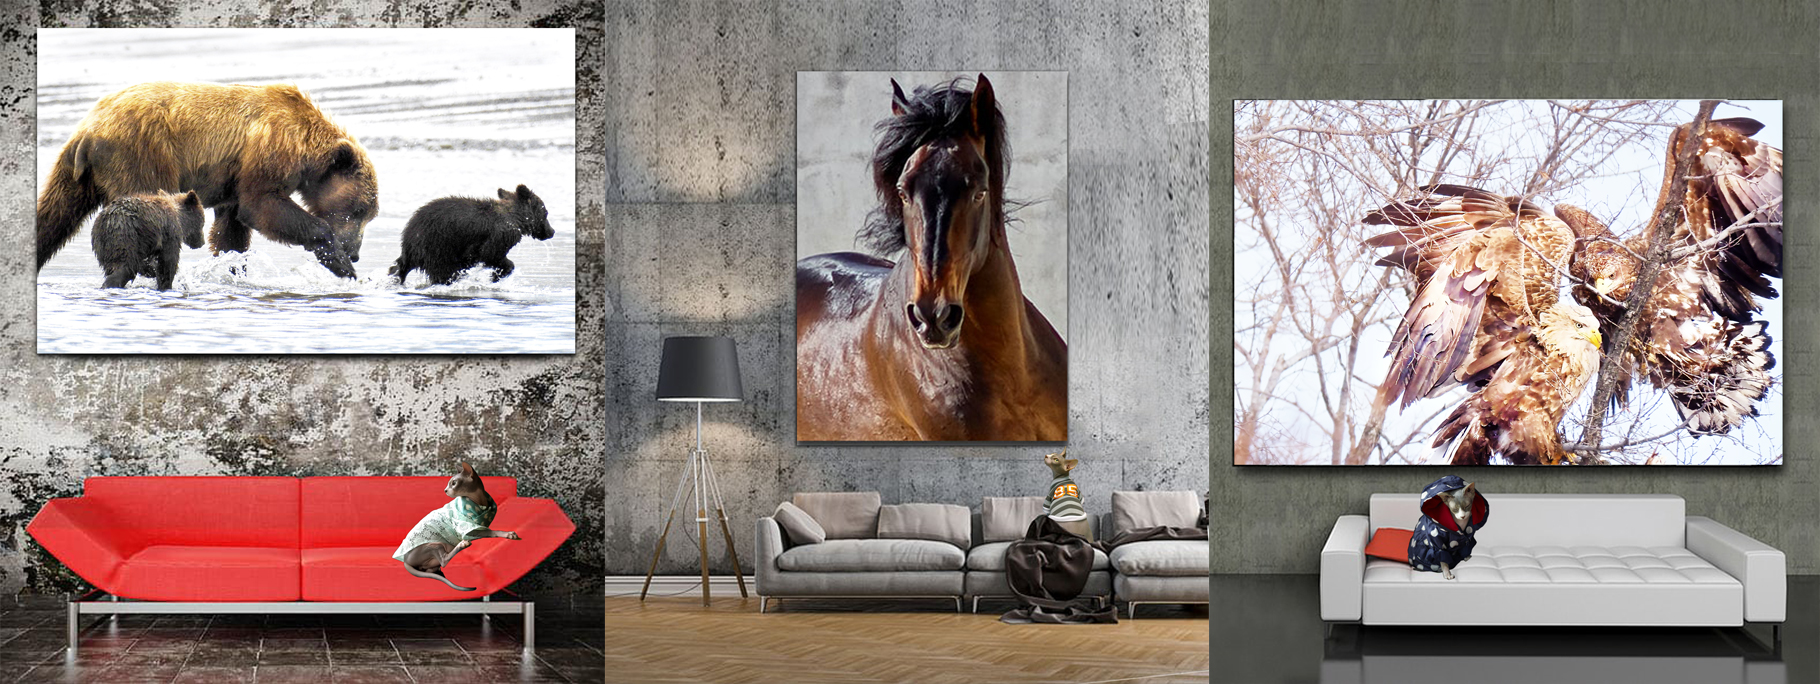 Animal Portraits Wall Art for Sale - Close up Animal Art by Dr Zenaidy Castro